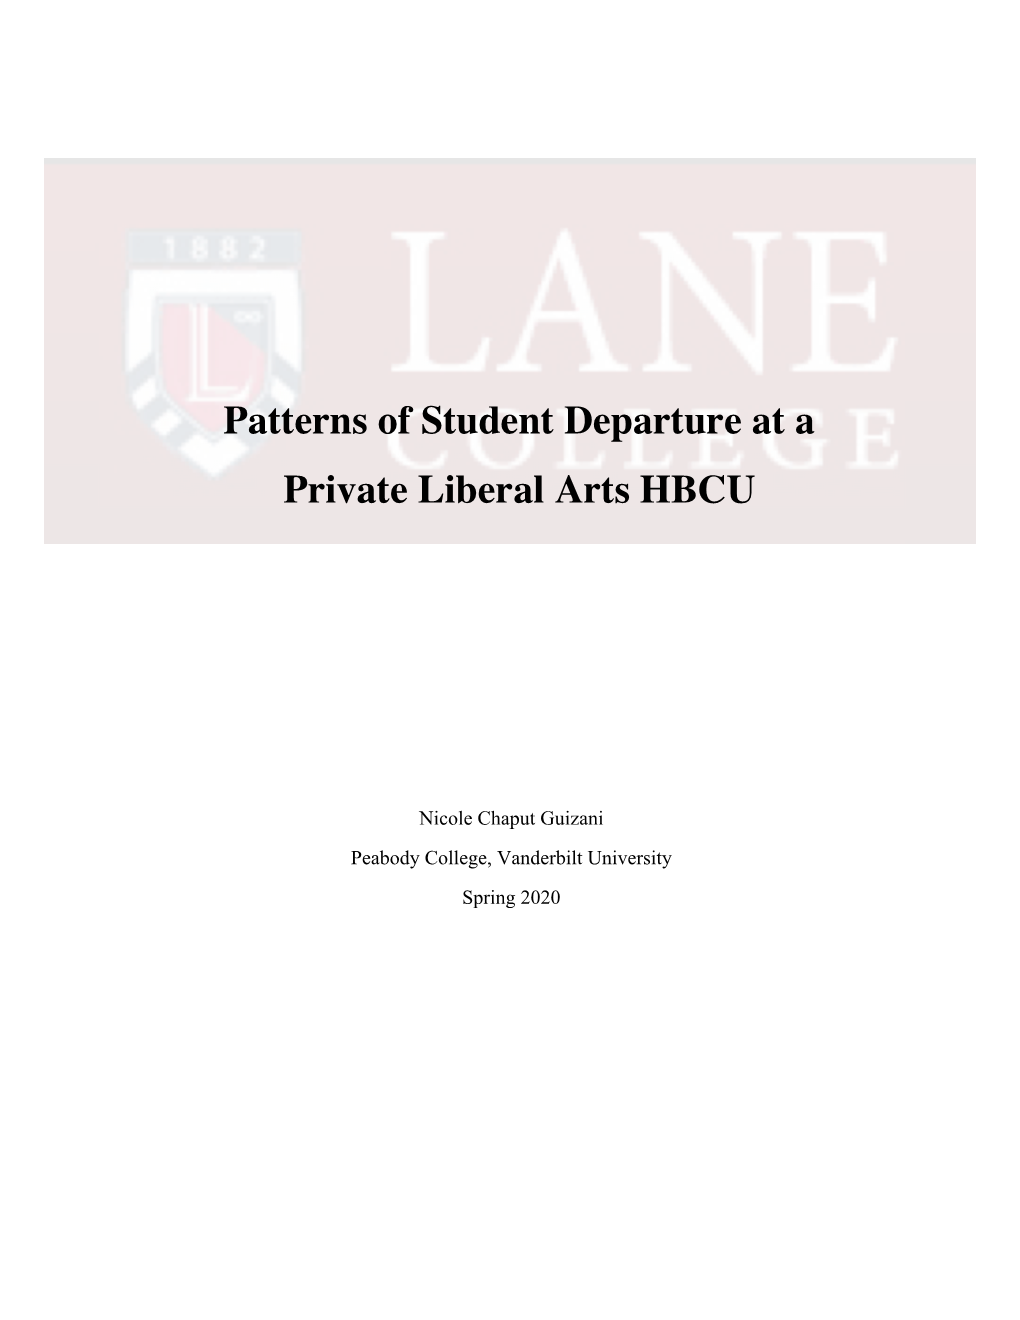 Patterns of Student Departure at a Private Liberal Arts HBCU